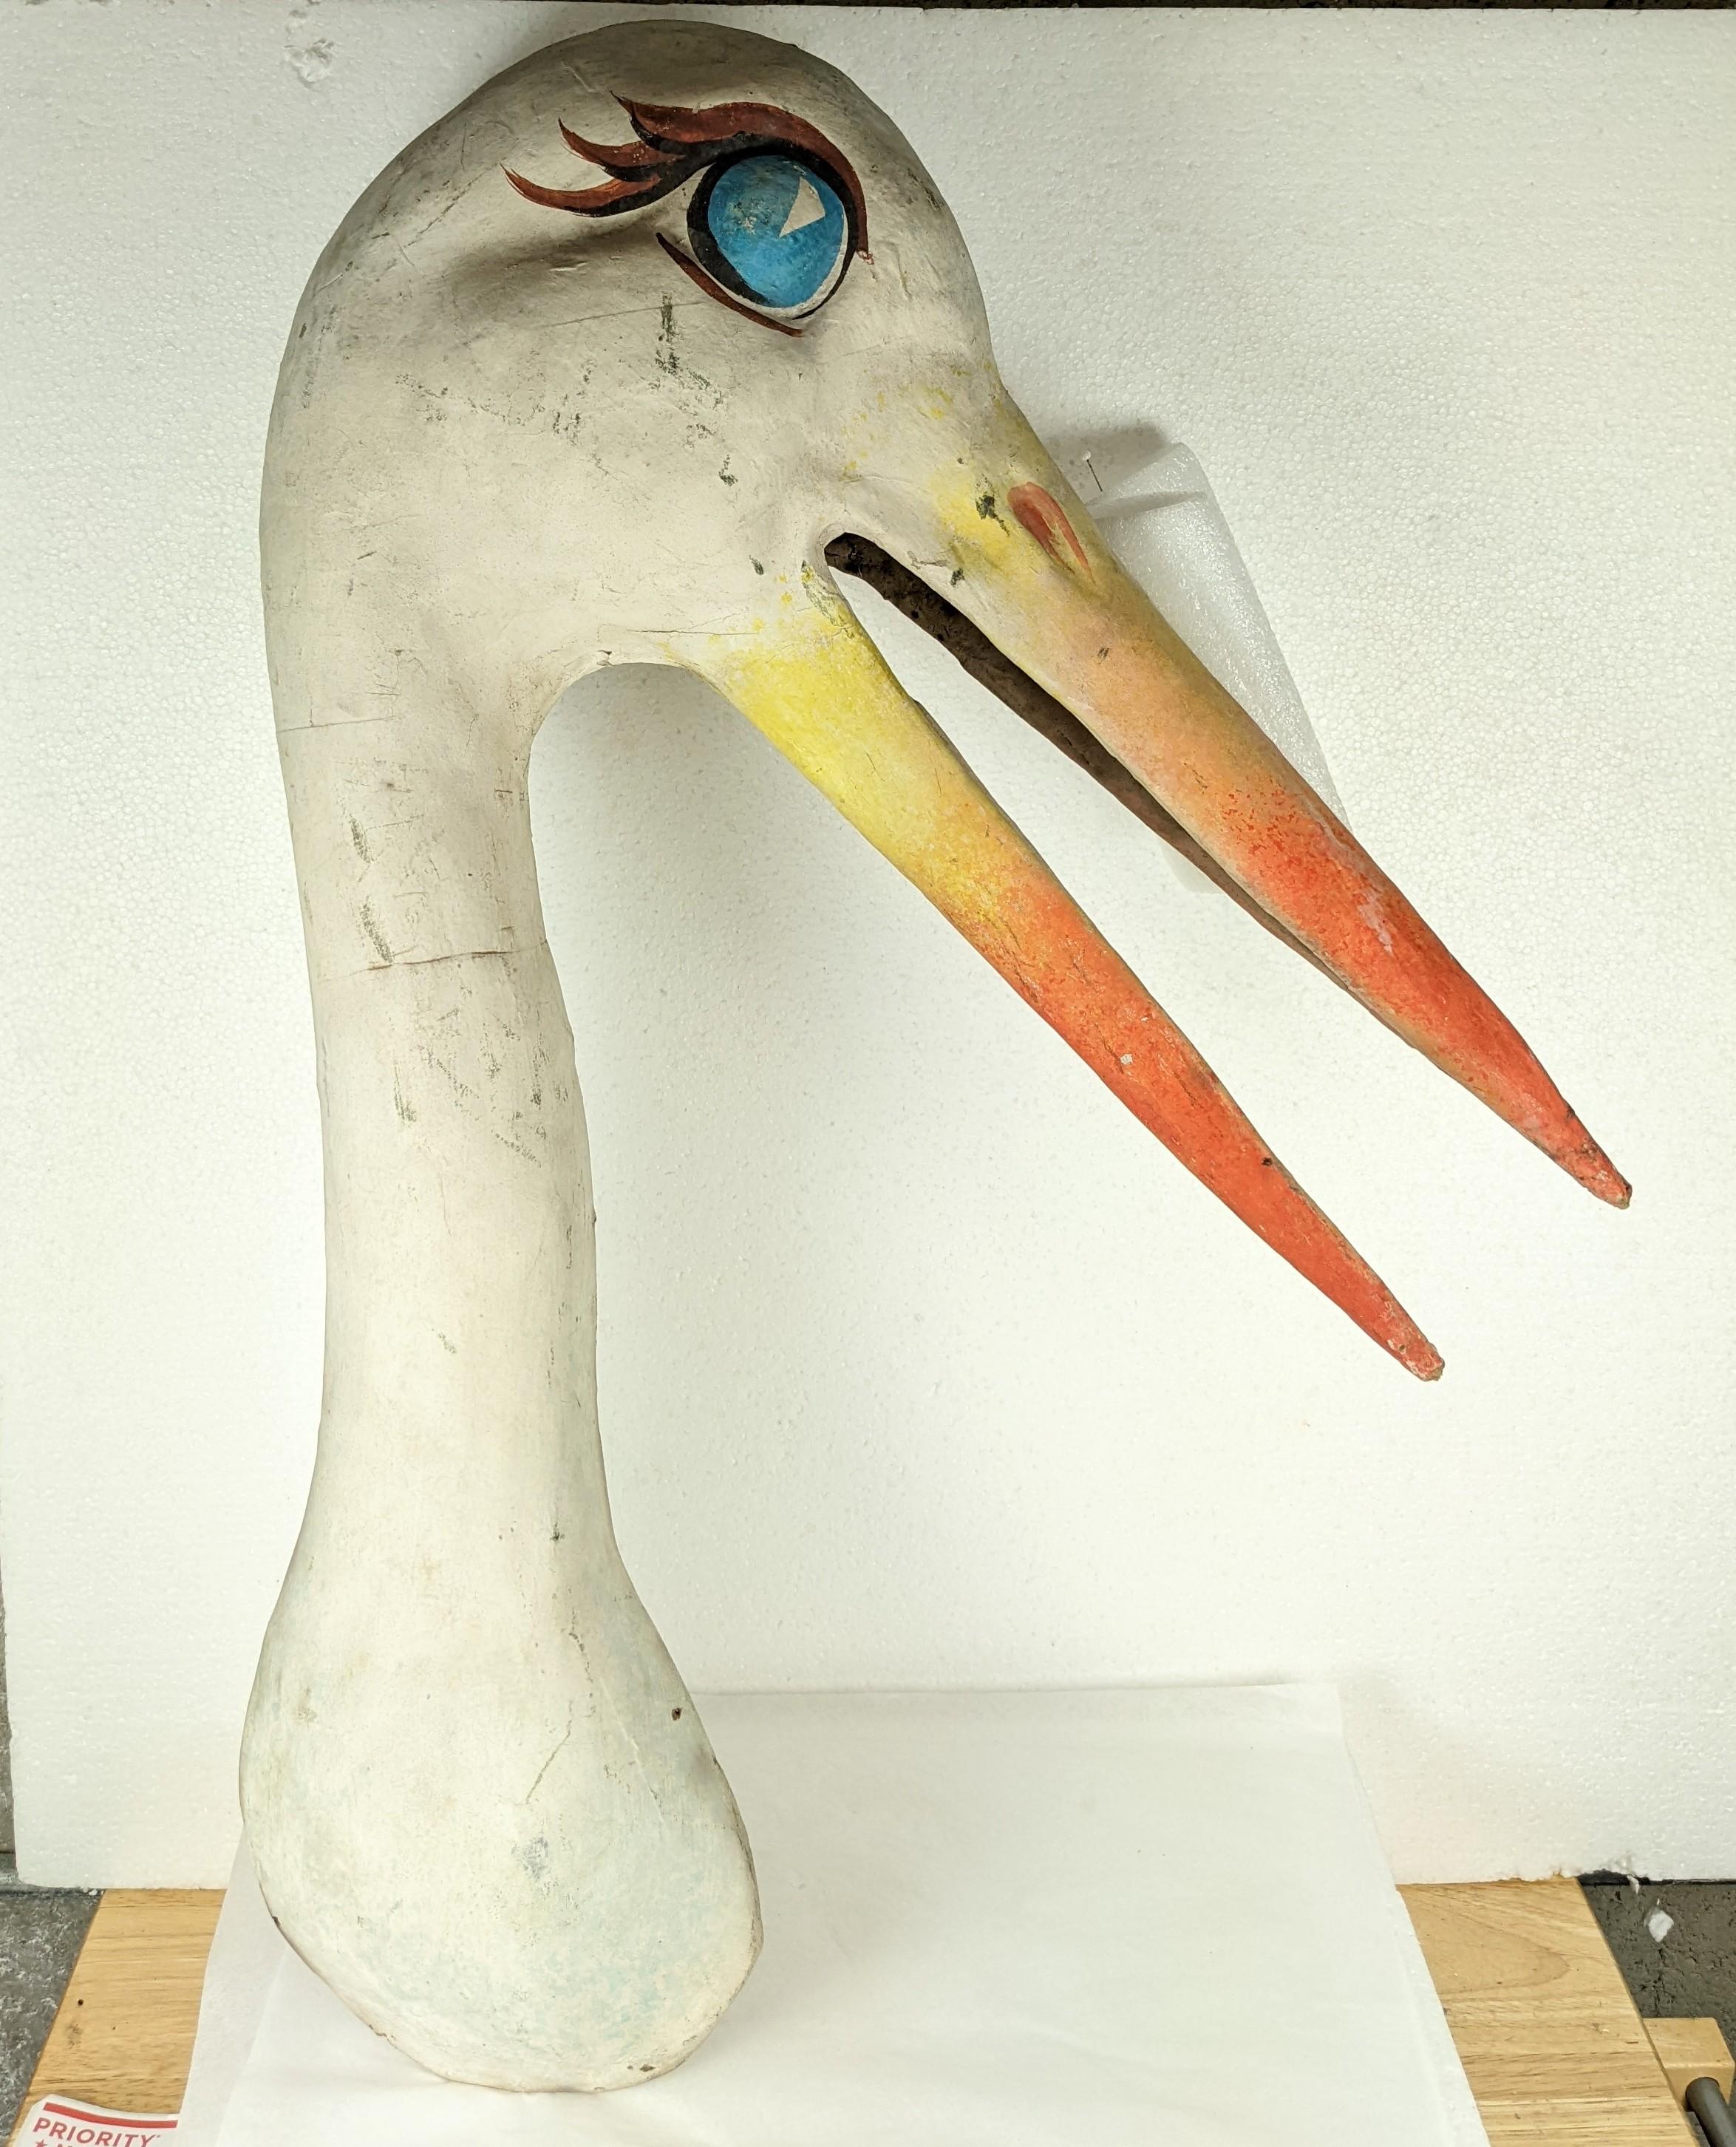 Paper mache stork from the 1940's possibly from a Carnival or Store Display with Cartoon like features. Features Original paint, great accent piece for a nursery.
Measures: 28